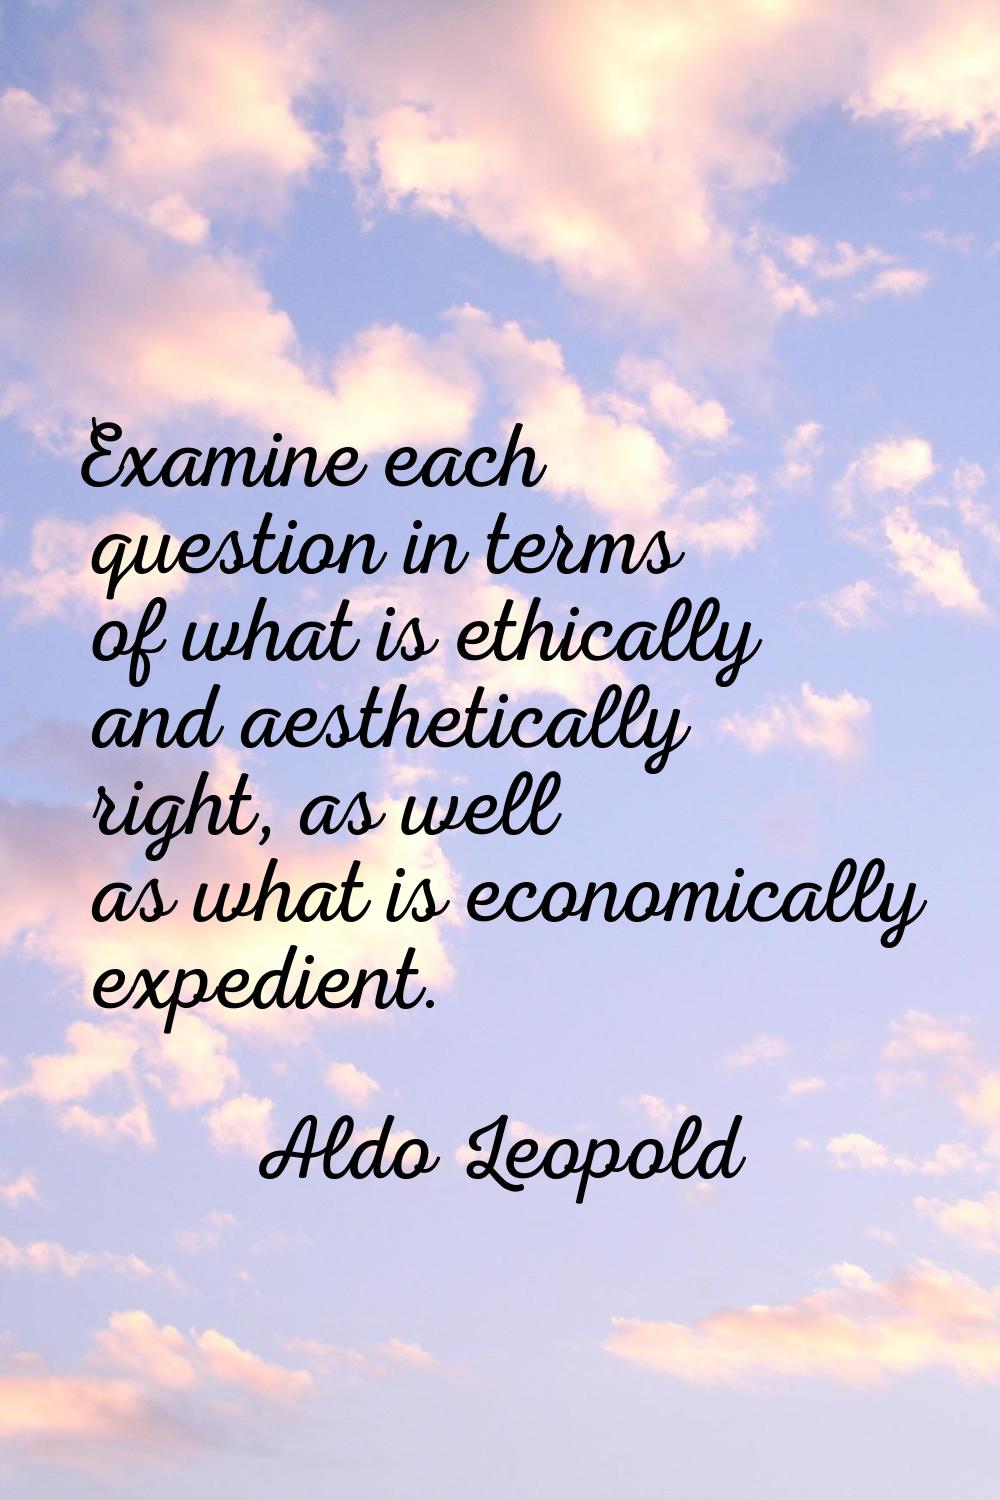 Examine each question in terms of what is ethically and aesthetically right, as well as what is eco